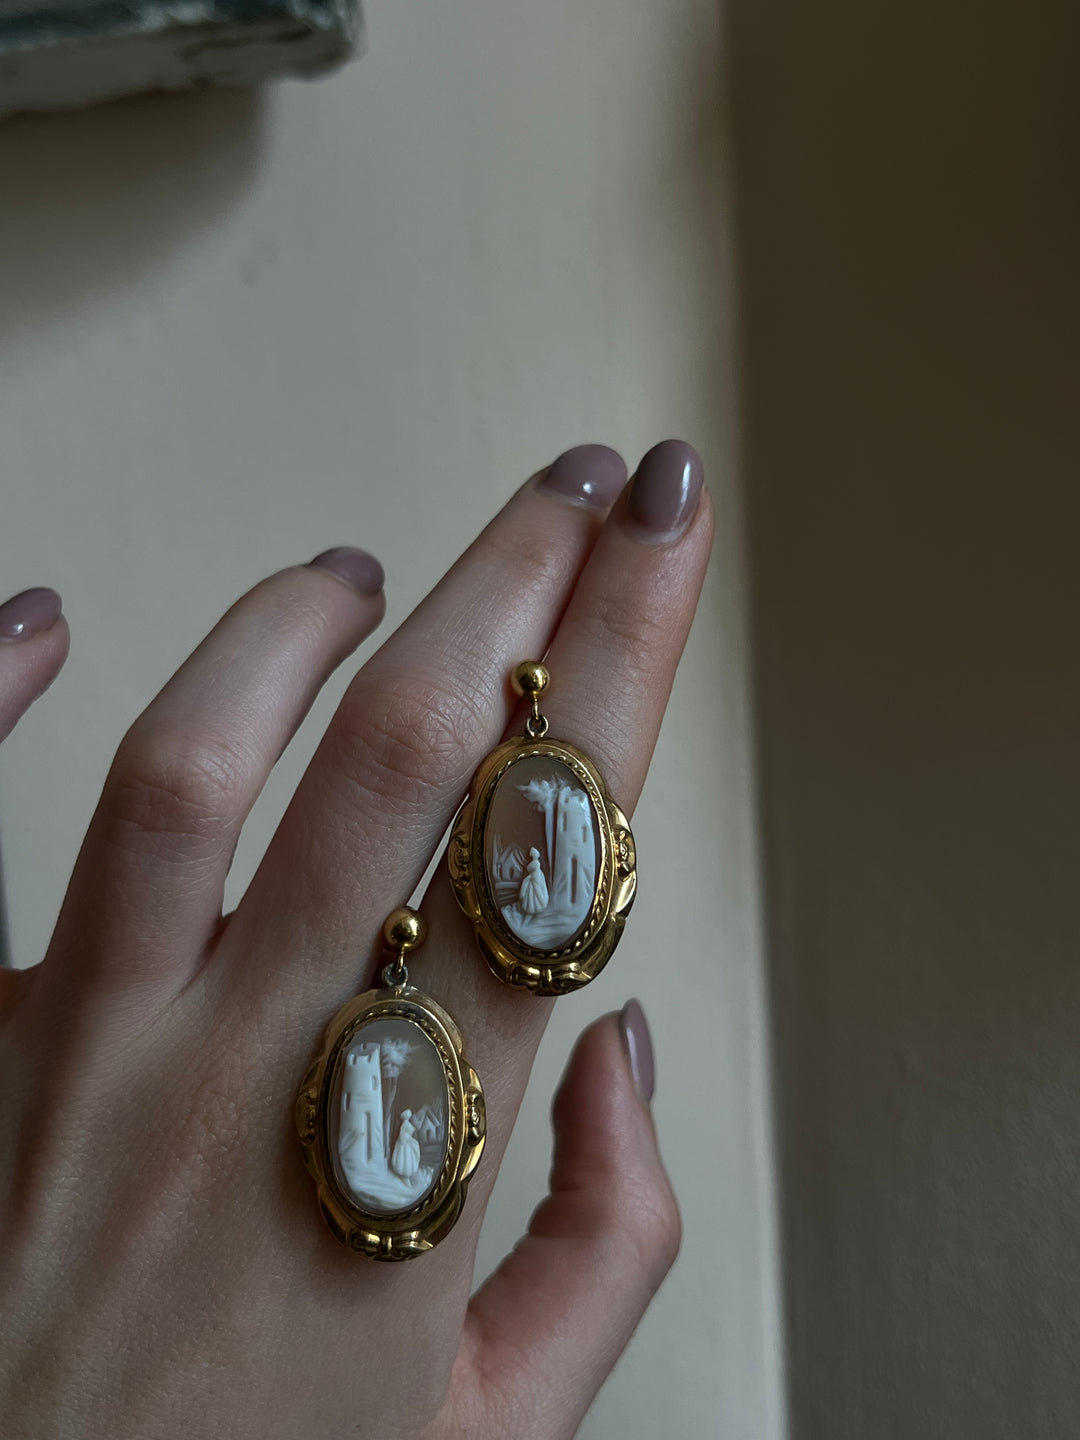 Superb Early 20th Century Cameo Earrings in 12ct